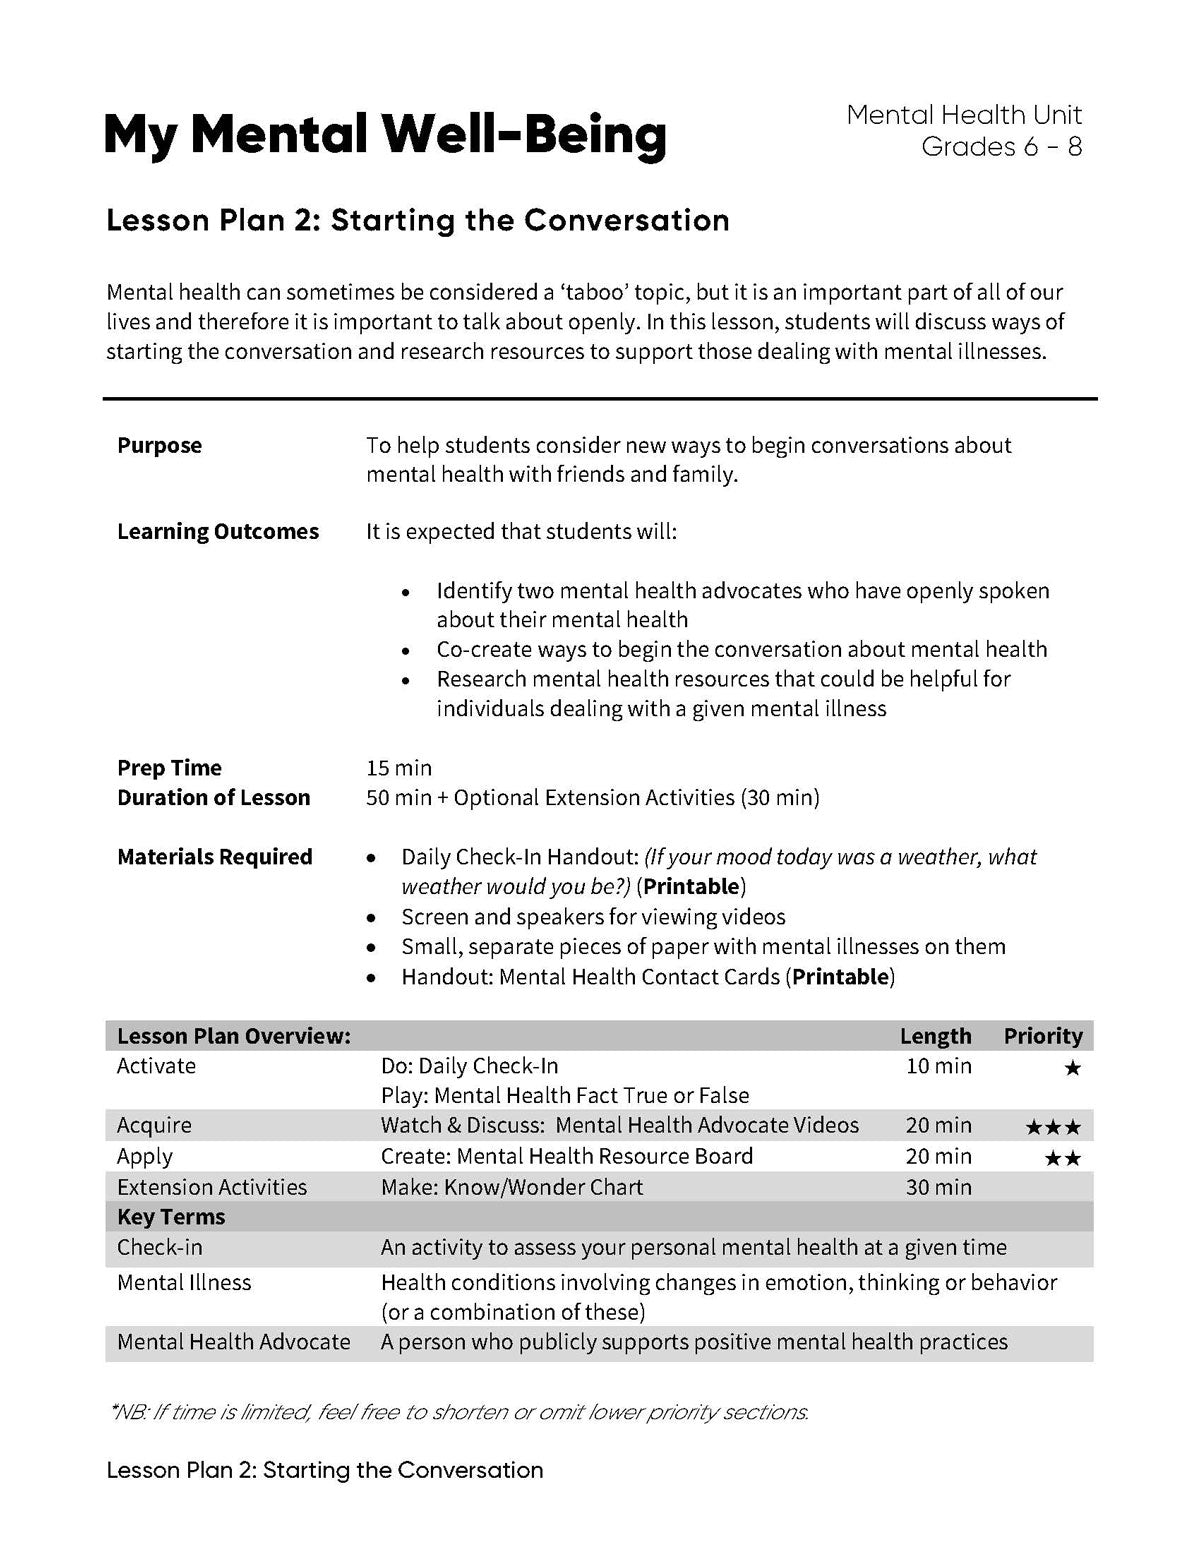 Lesson Plan 2: Starting the Conversation